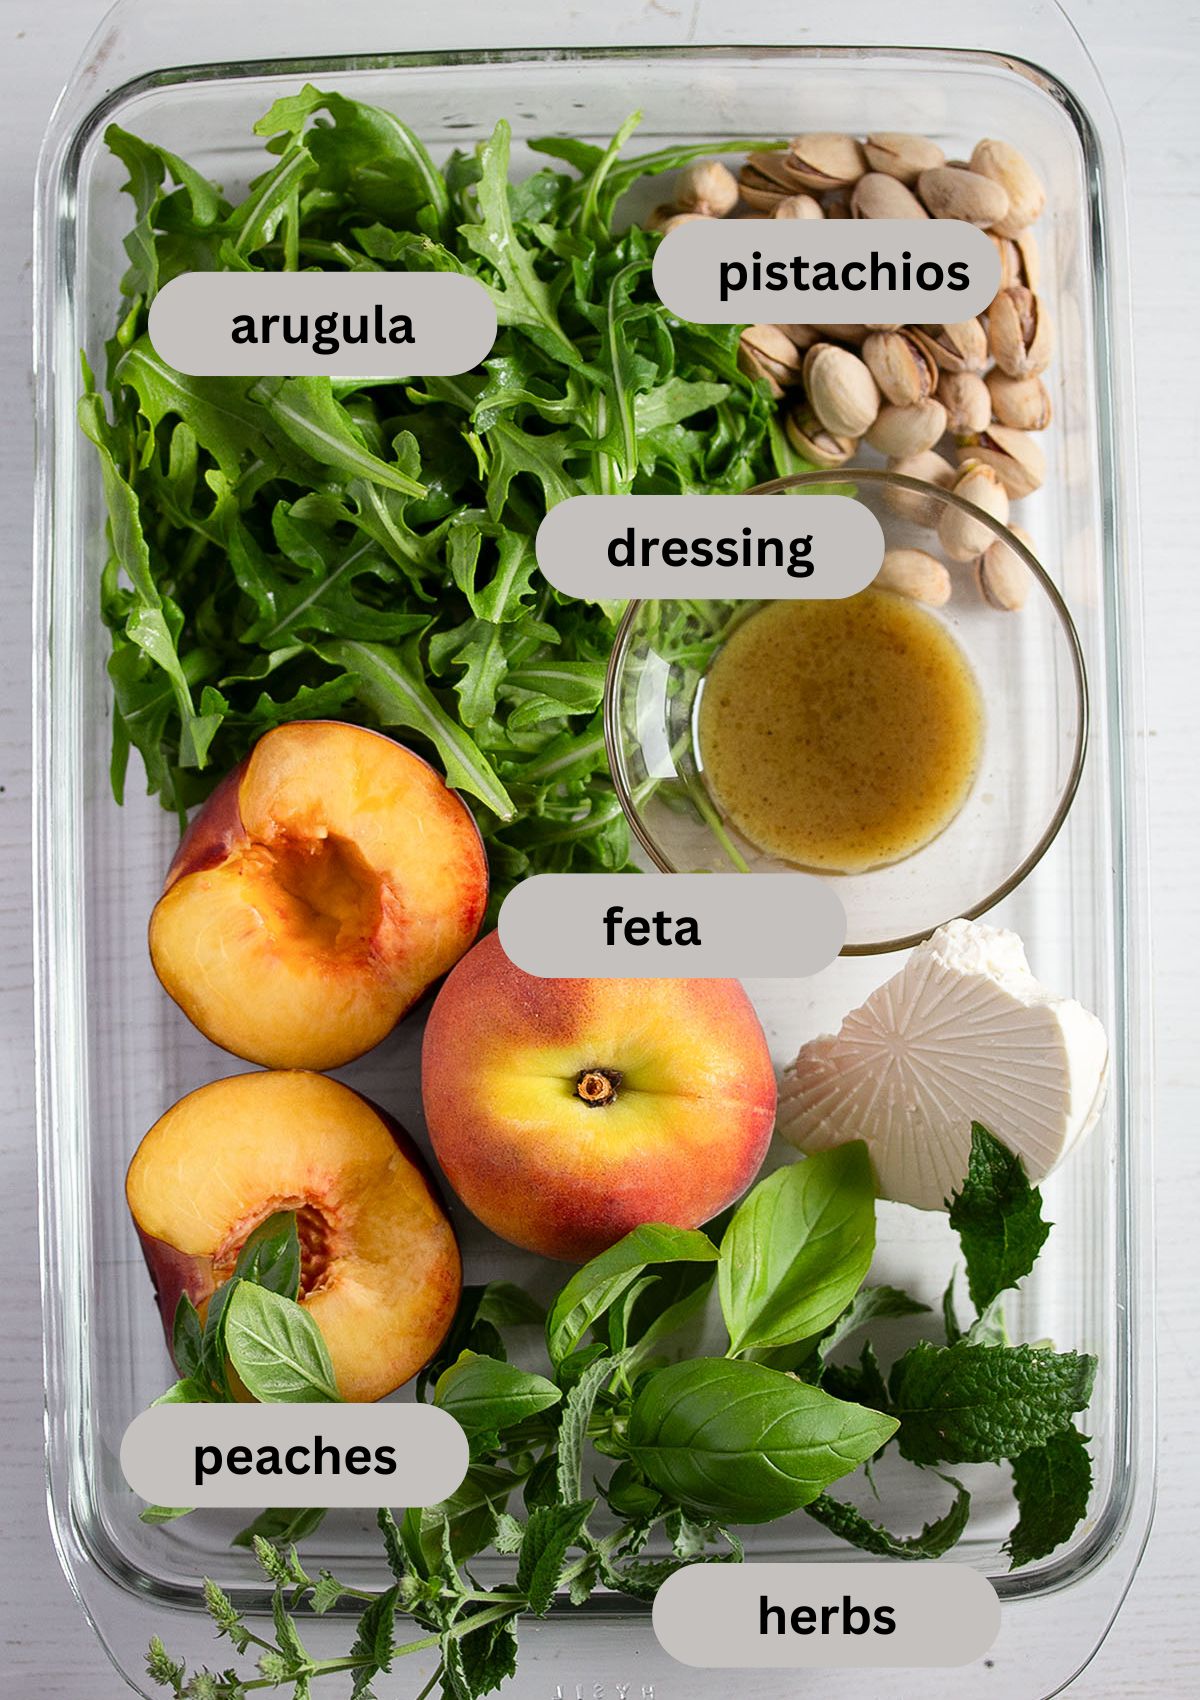 labeled ingredients for making peach salad with arugula and herbs in a glass baking dish.